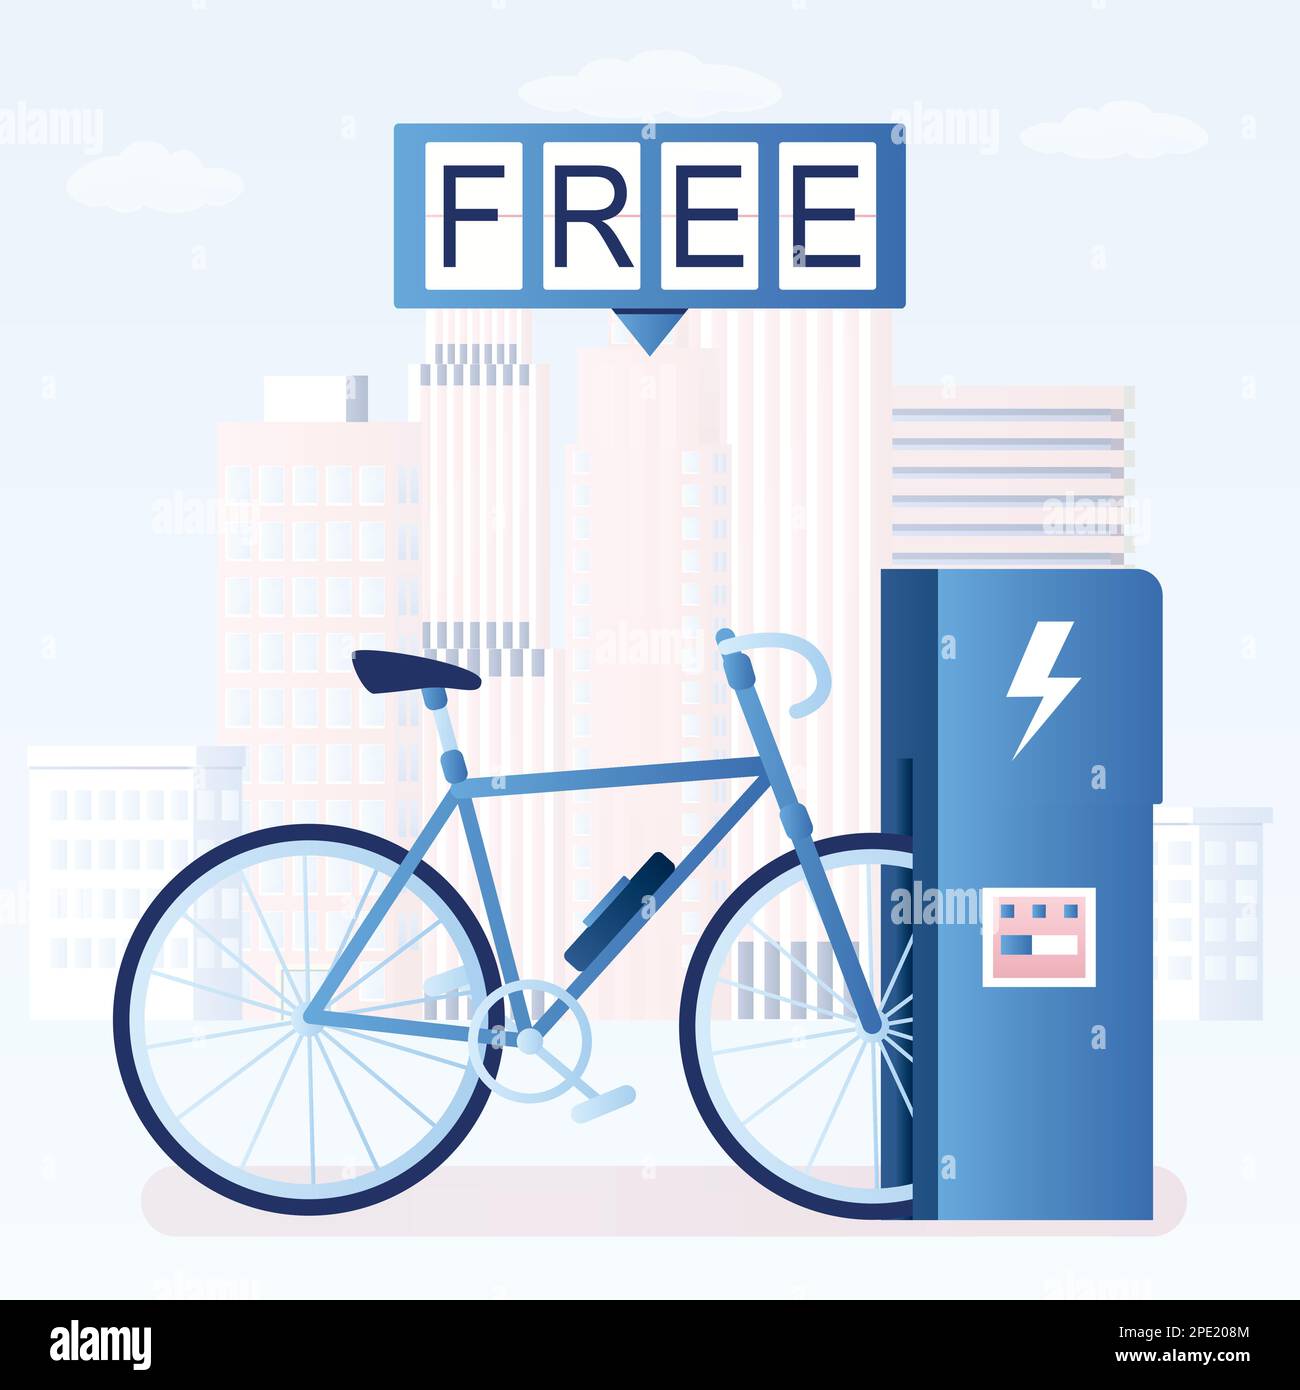 Modern electric bike and charging station.Free charge and green technology concept. Eco vehicle in trendy style. Urban view on background. Flat vector Stock Vector